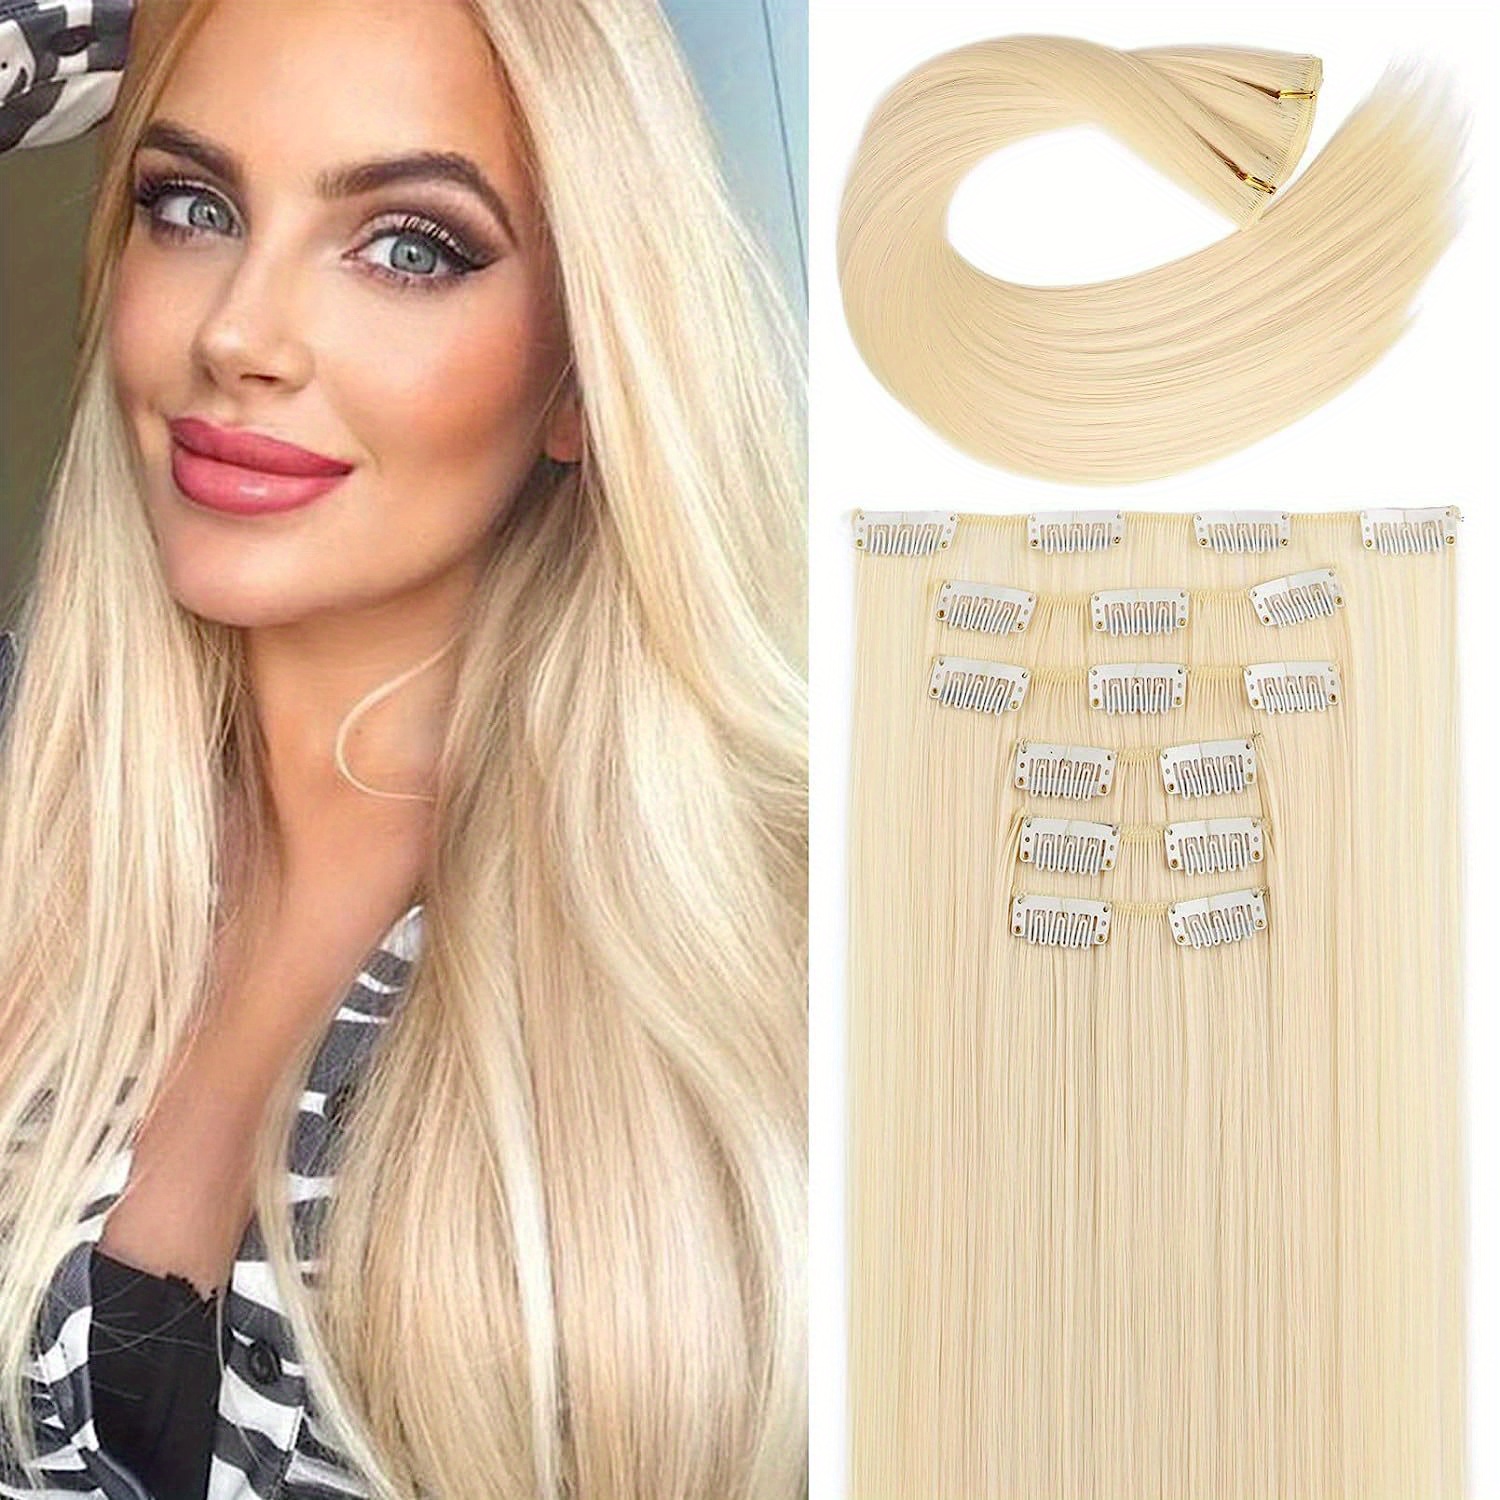 24 Straight Clips in hair extensions Clips on Hairpieces Synthetic